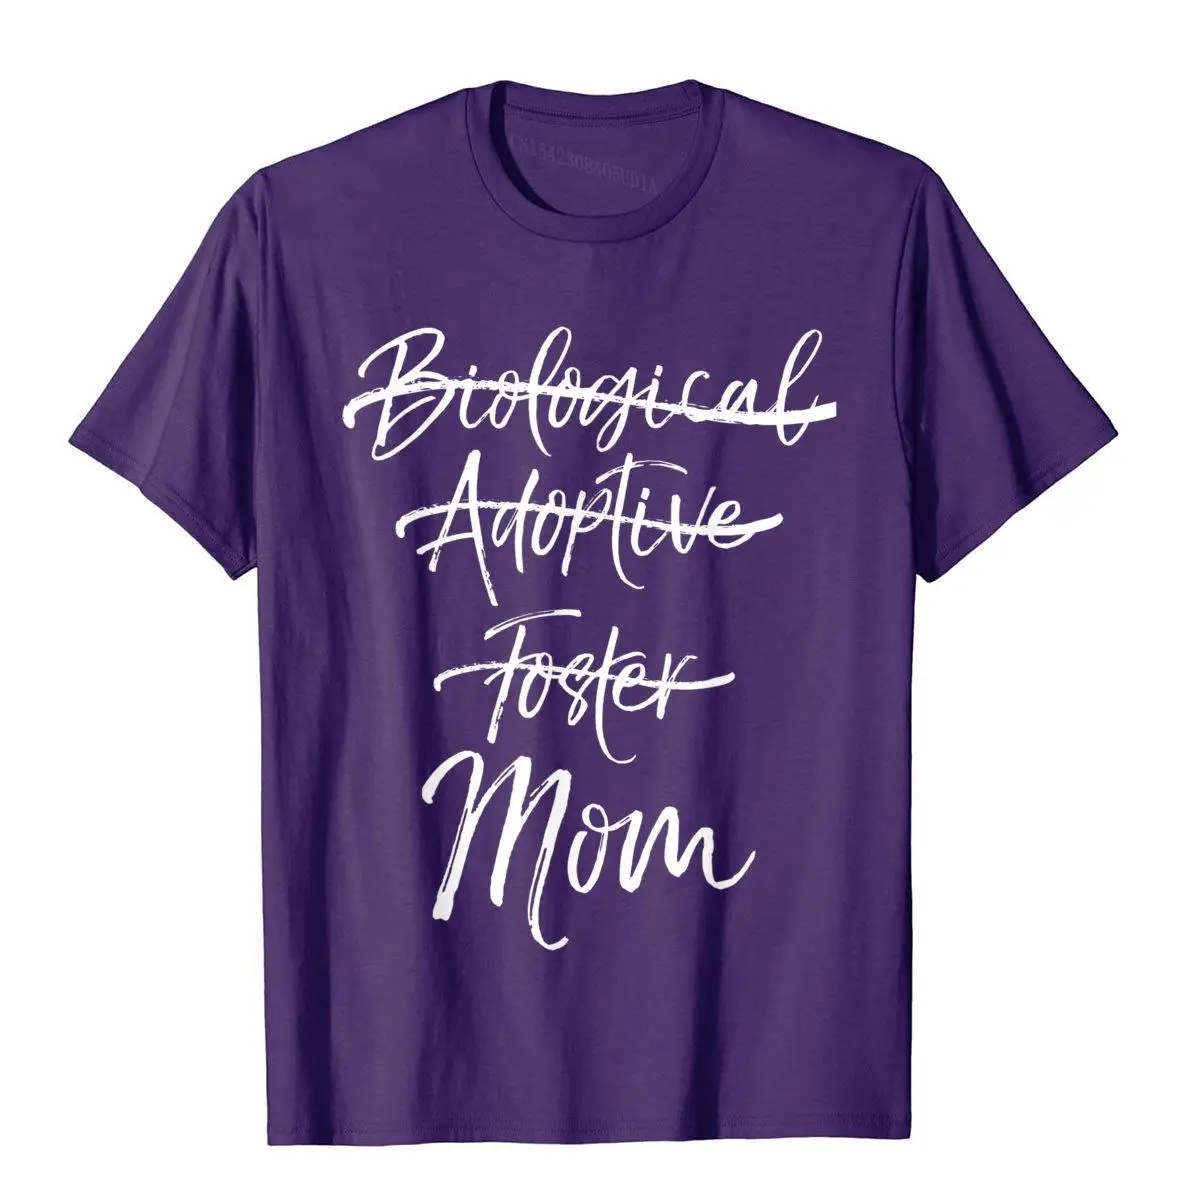 Not Biological Adoptive Foster Just Mom Shirt Marked Out Tee__B9814purple